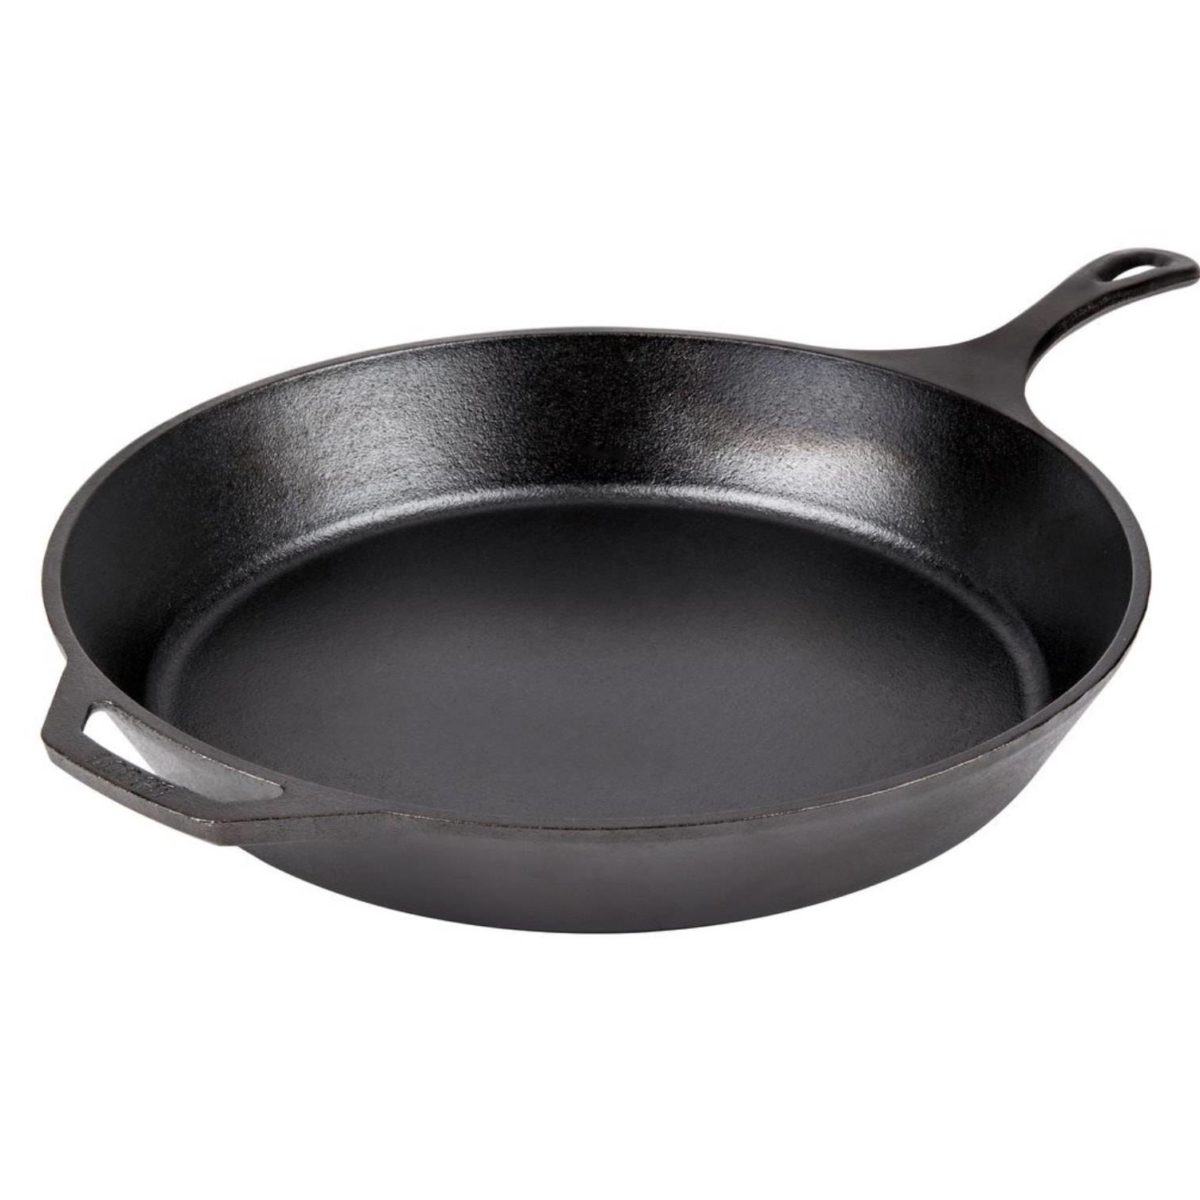 A picture of Cast Iron Skillet